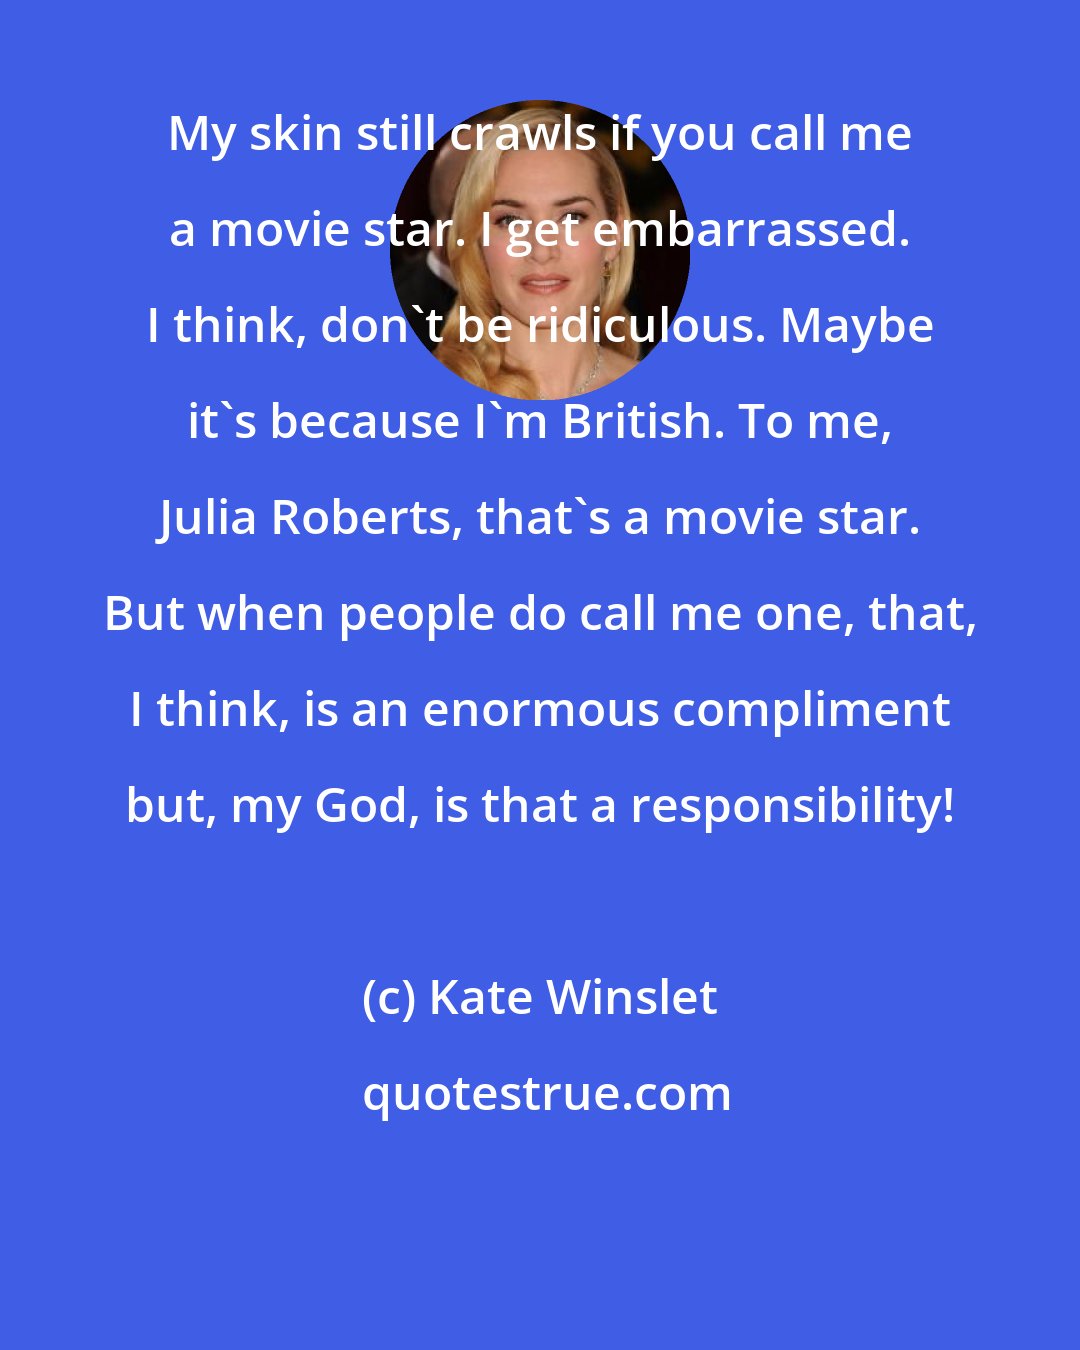 Kate Winslet: My skin still crawls if you call me a movie star. I get embarrassed. I think, don't be ridiculous. Maybe it's because I'm British. To me, Julia Roberts, that's a movie star. But when people do call me one, that, I think, is an enormous compliment but, my God, is that a responsibility!